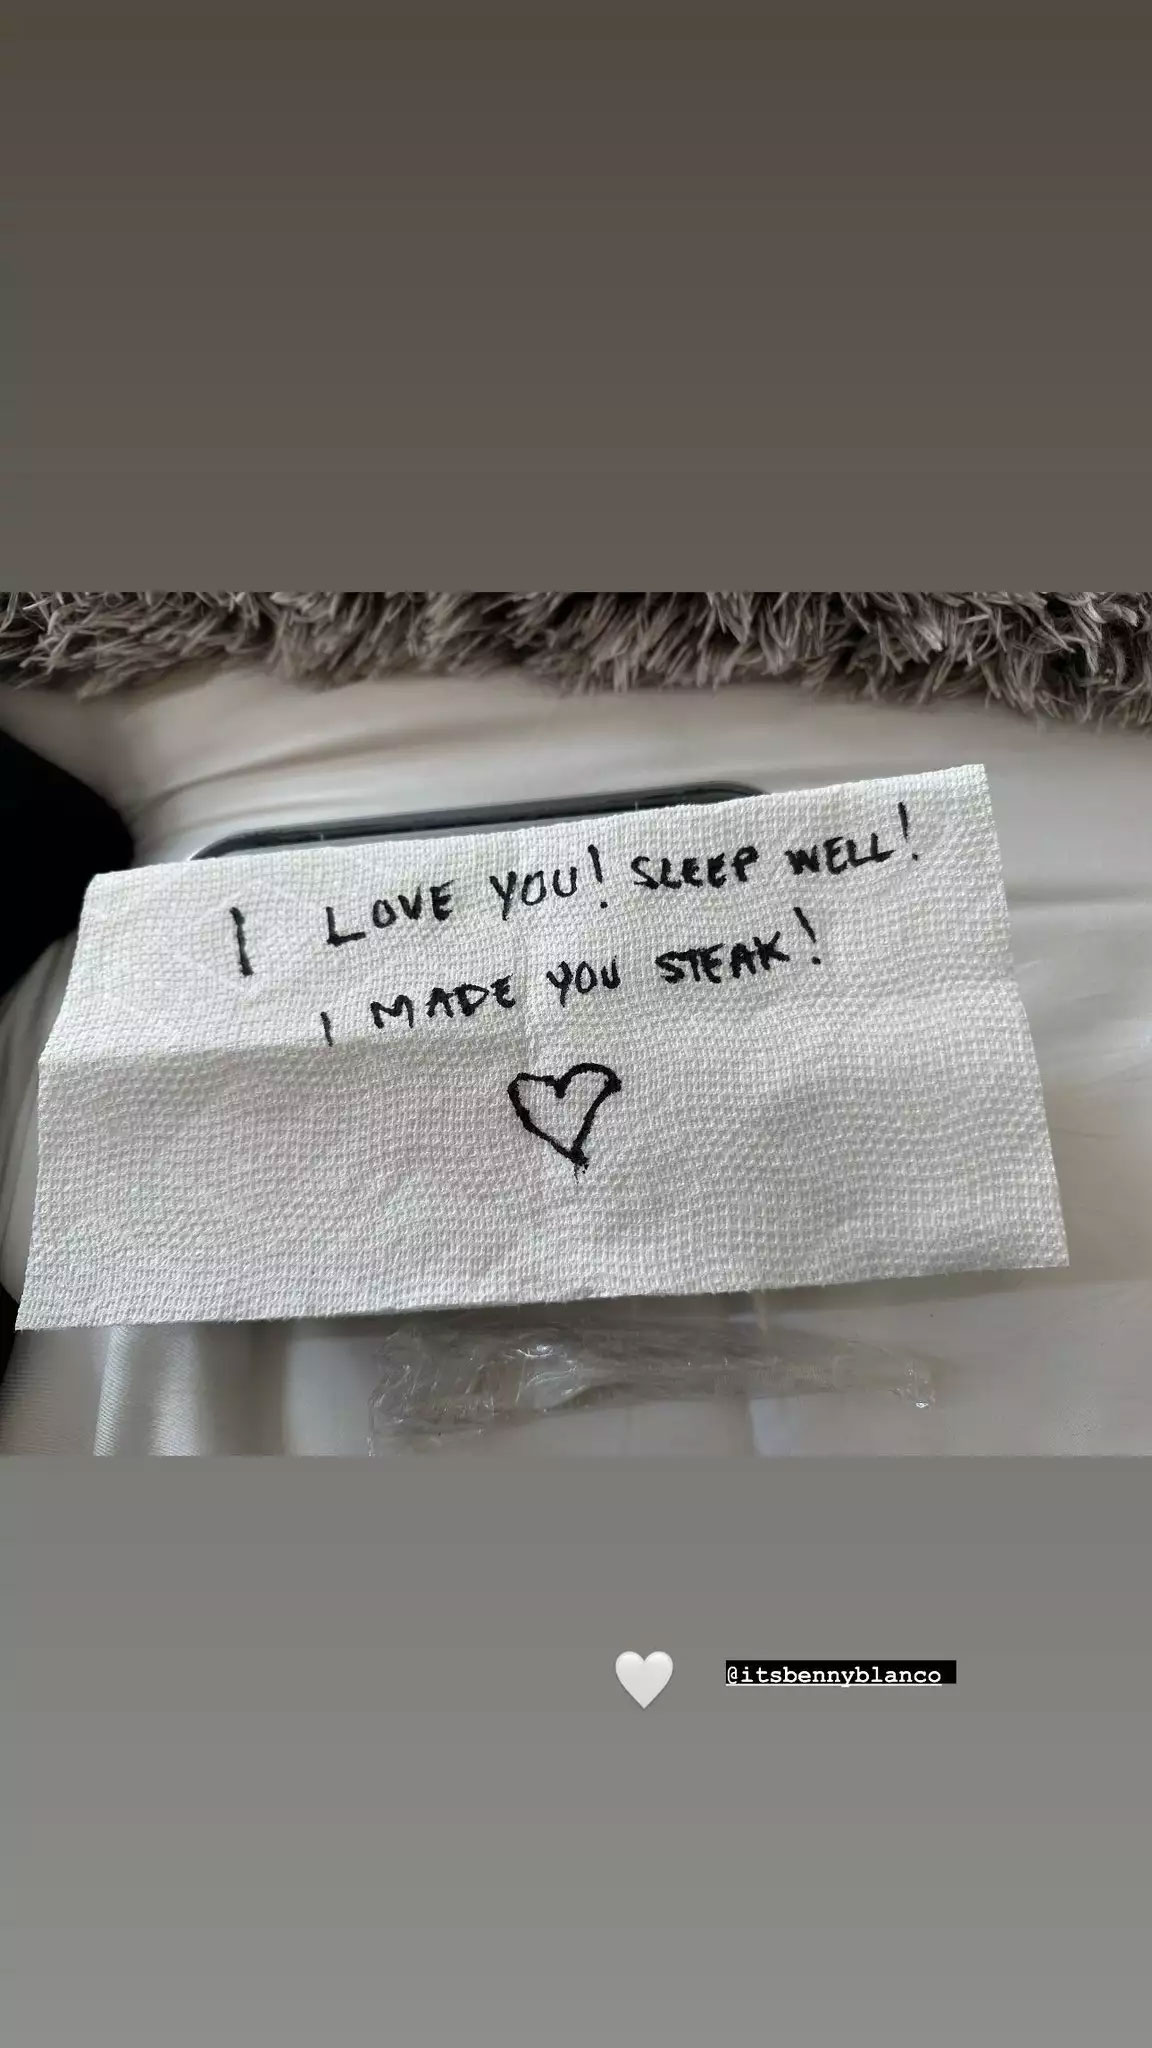 Selena Gomez unveils tissue paper note from beau Benny Blanco